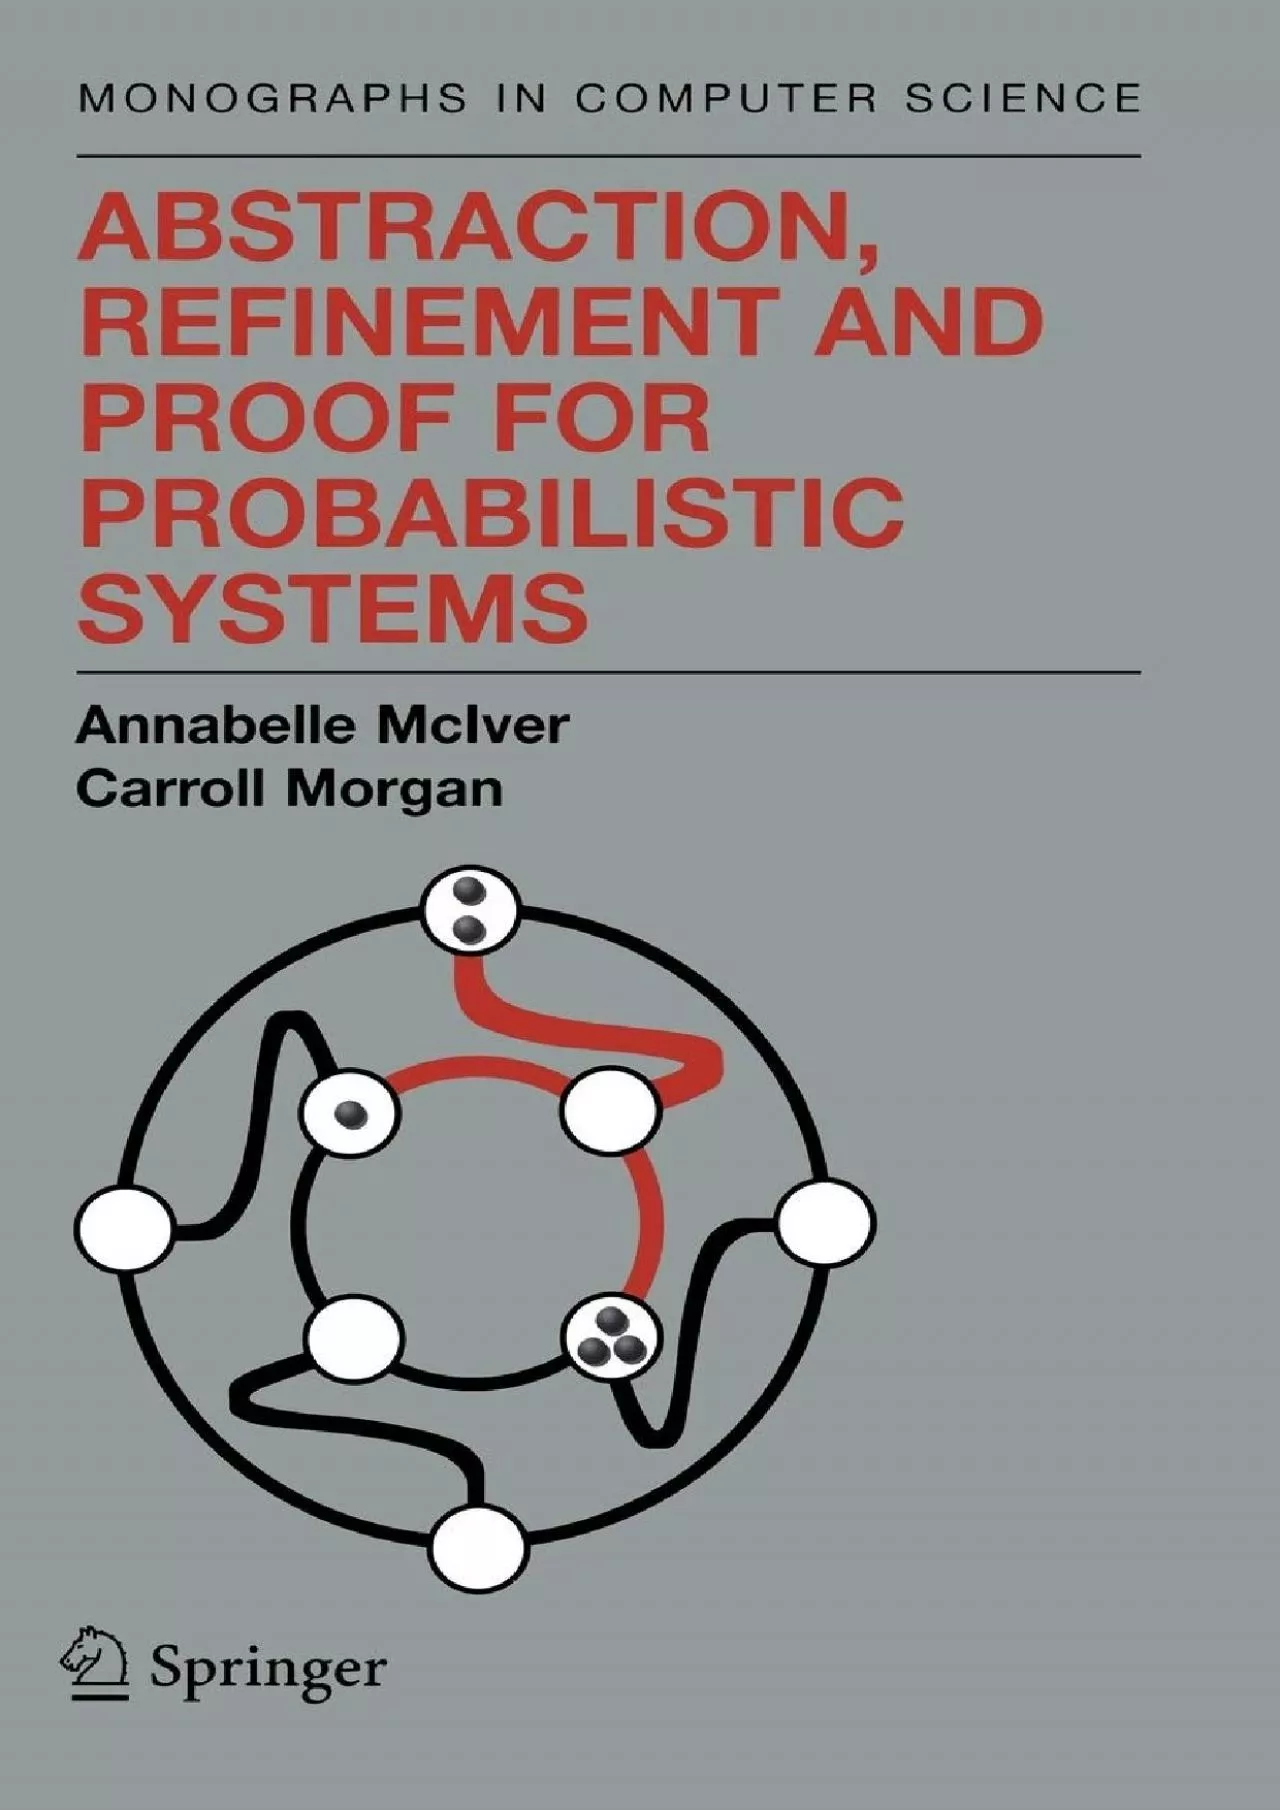 [READING BOOK]-Abstraction, Refinement and Proof for Probabilistic Systems (Monographs